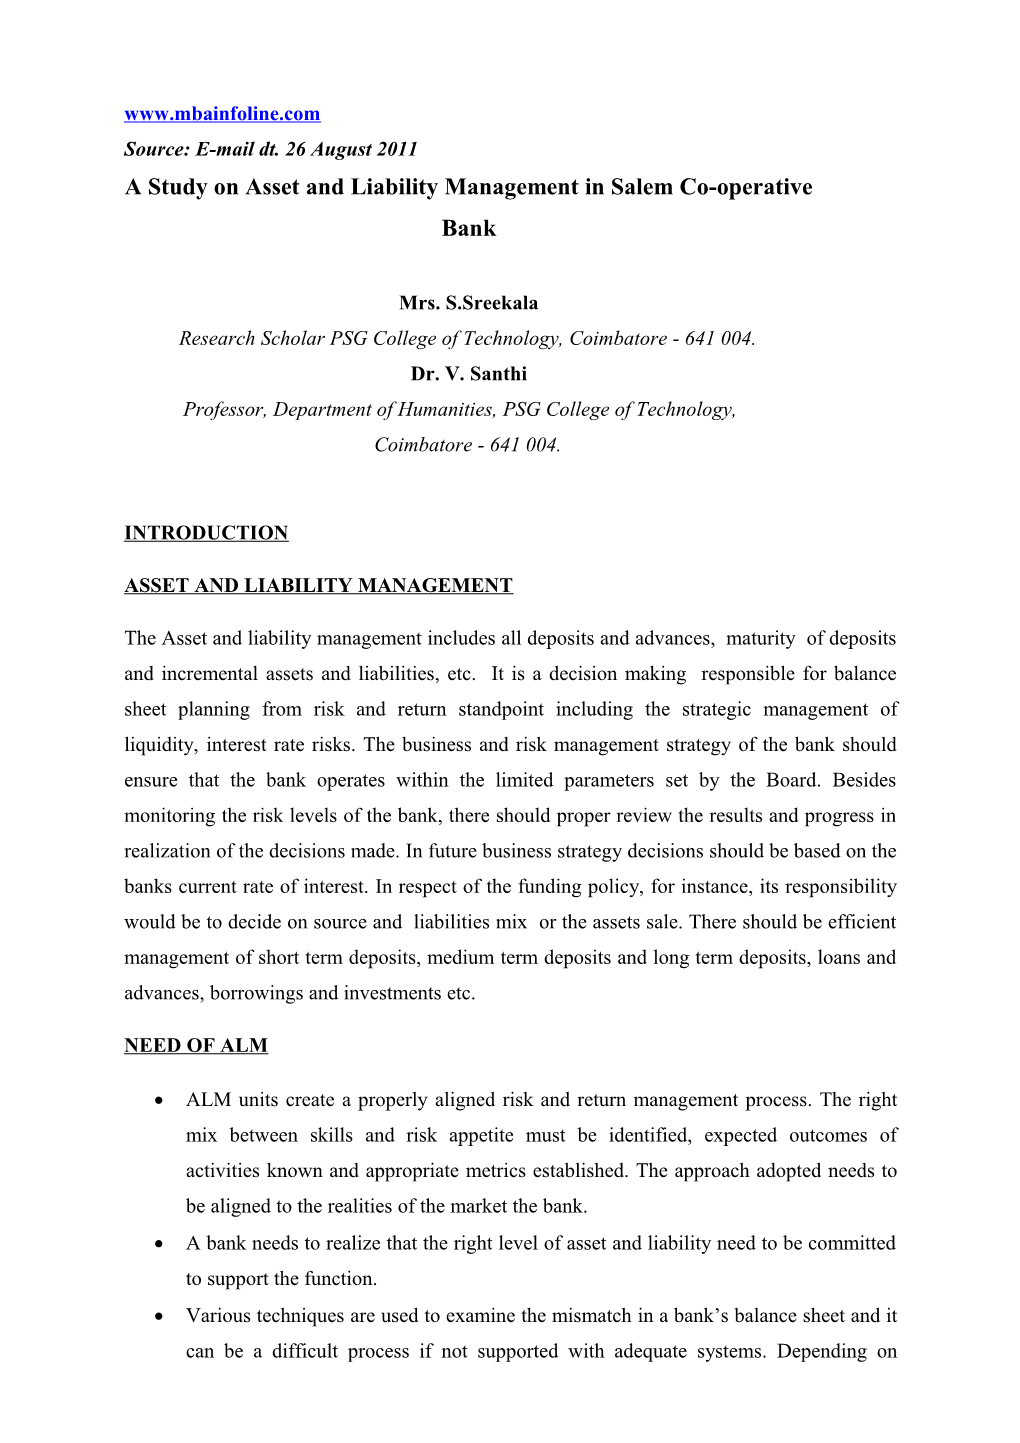 A Study on Asset and Liability Management in Salem Co-Operative Bank